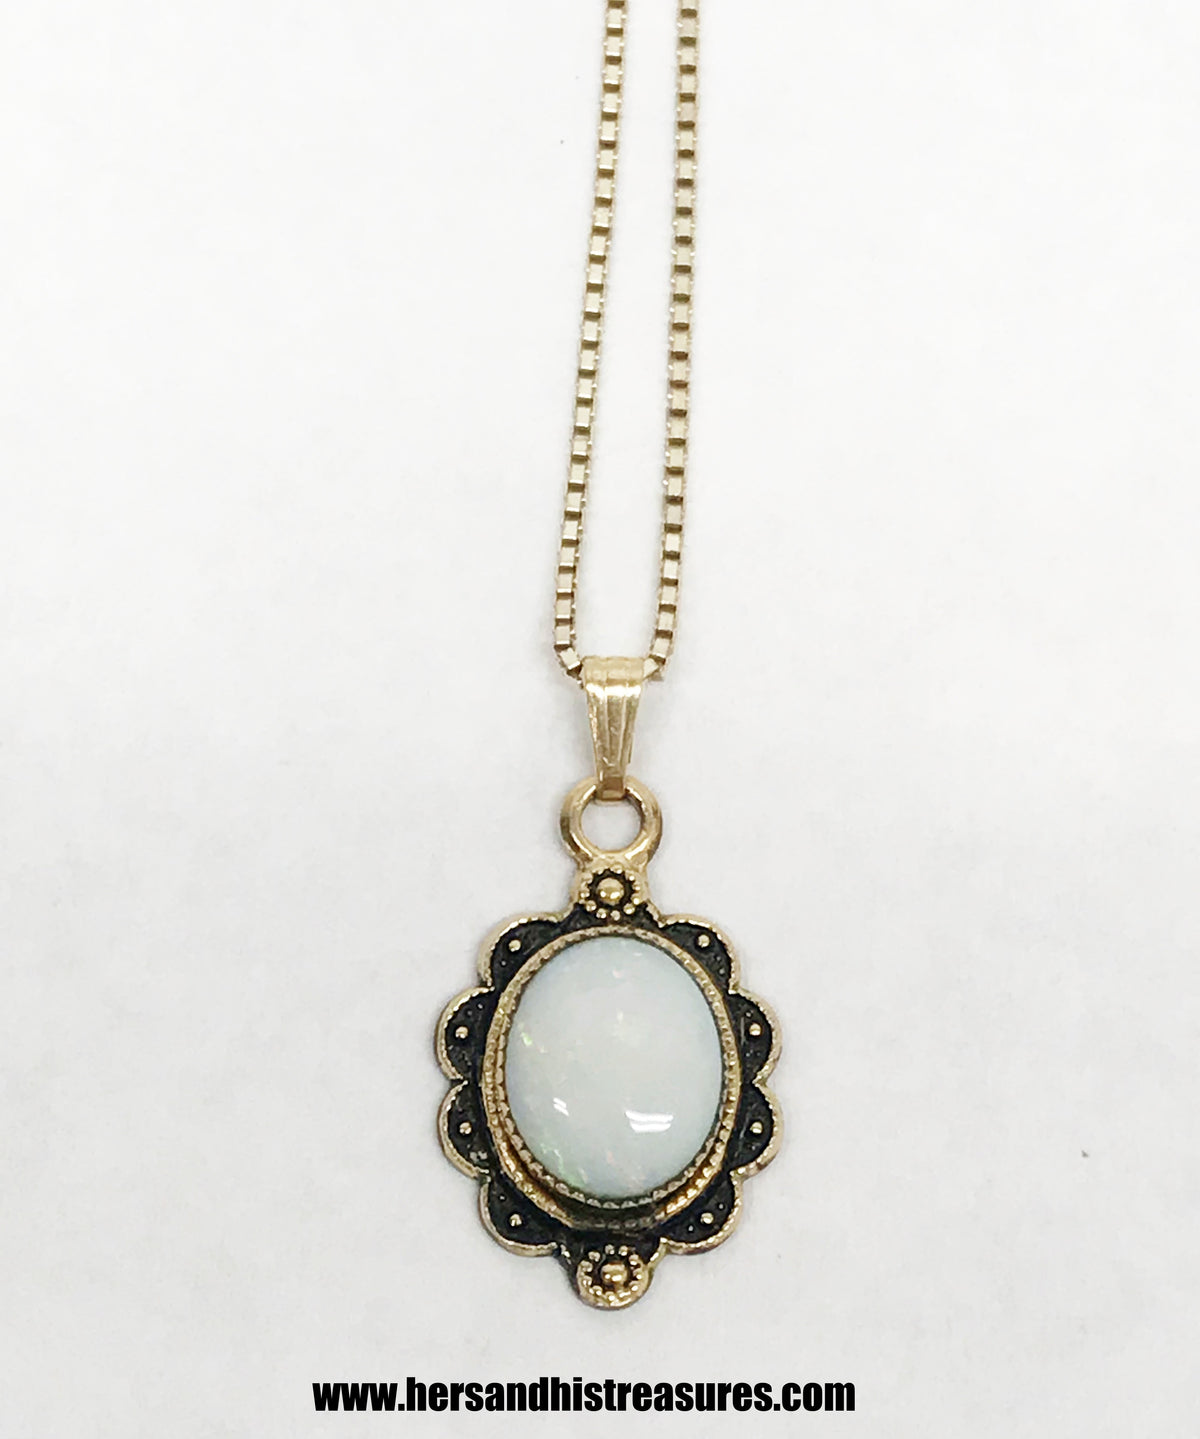 www.hersandhistreasures.com/products/gold-over-sterling-silver-opal-necklace-made-by-gimet-arezzo-italy